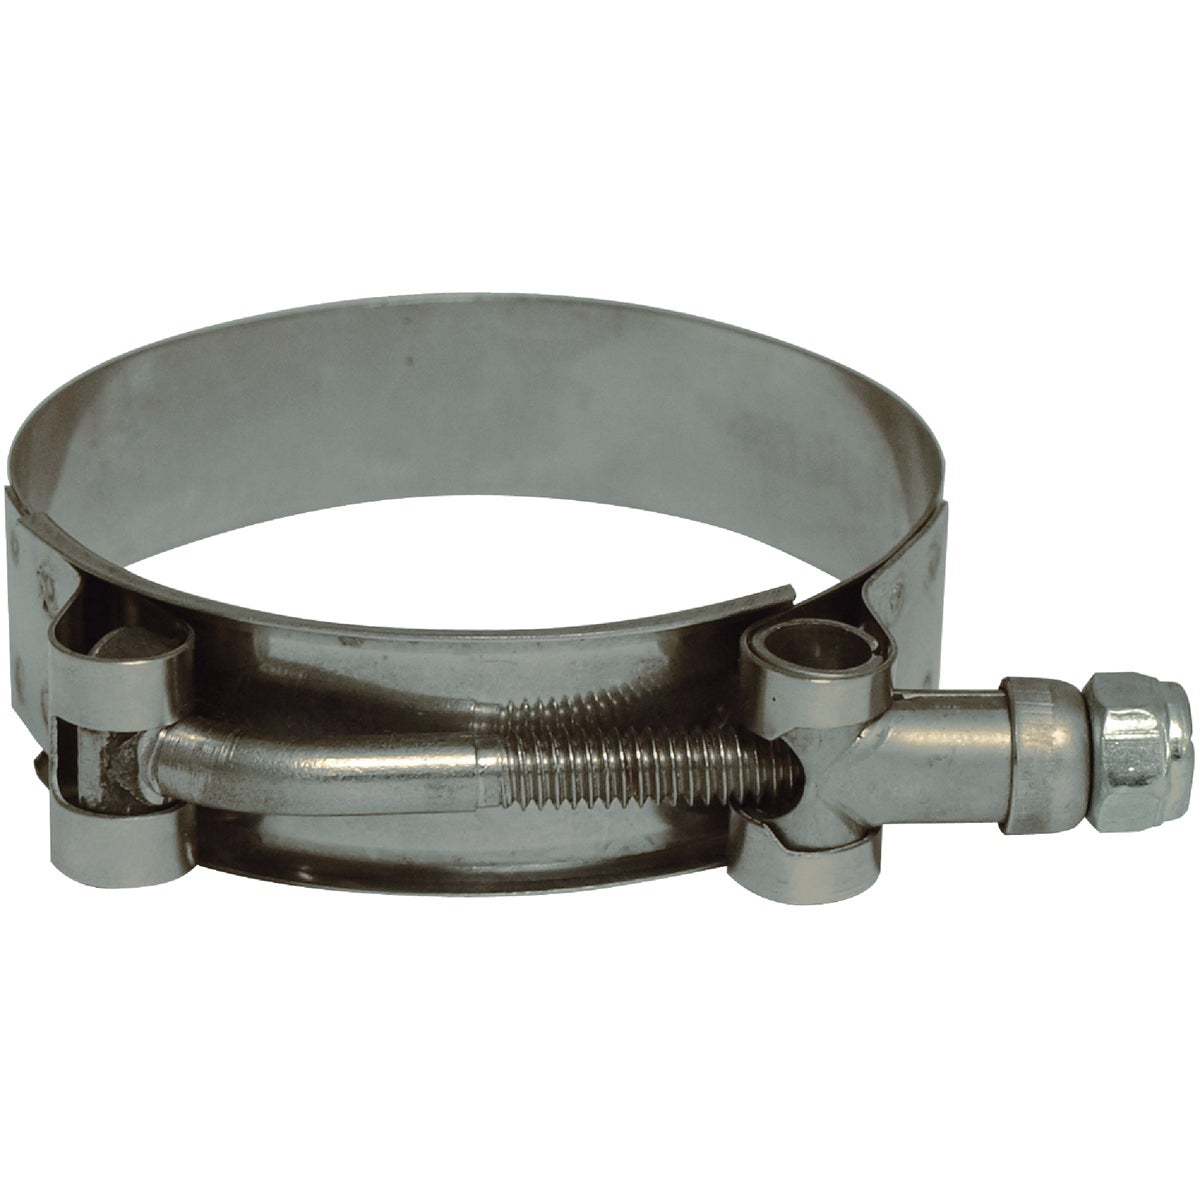 Apache 2-5/16 In. x 2-5/8 In. Stainless Steel T-Bolt Clamp